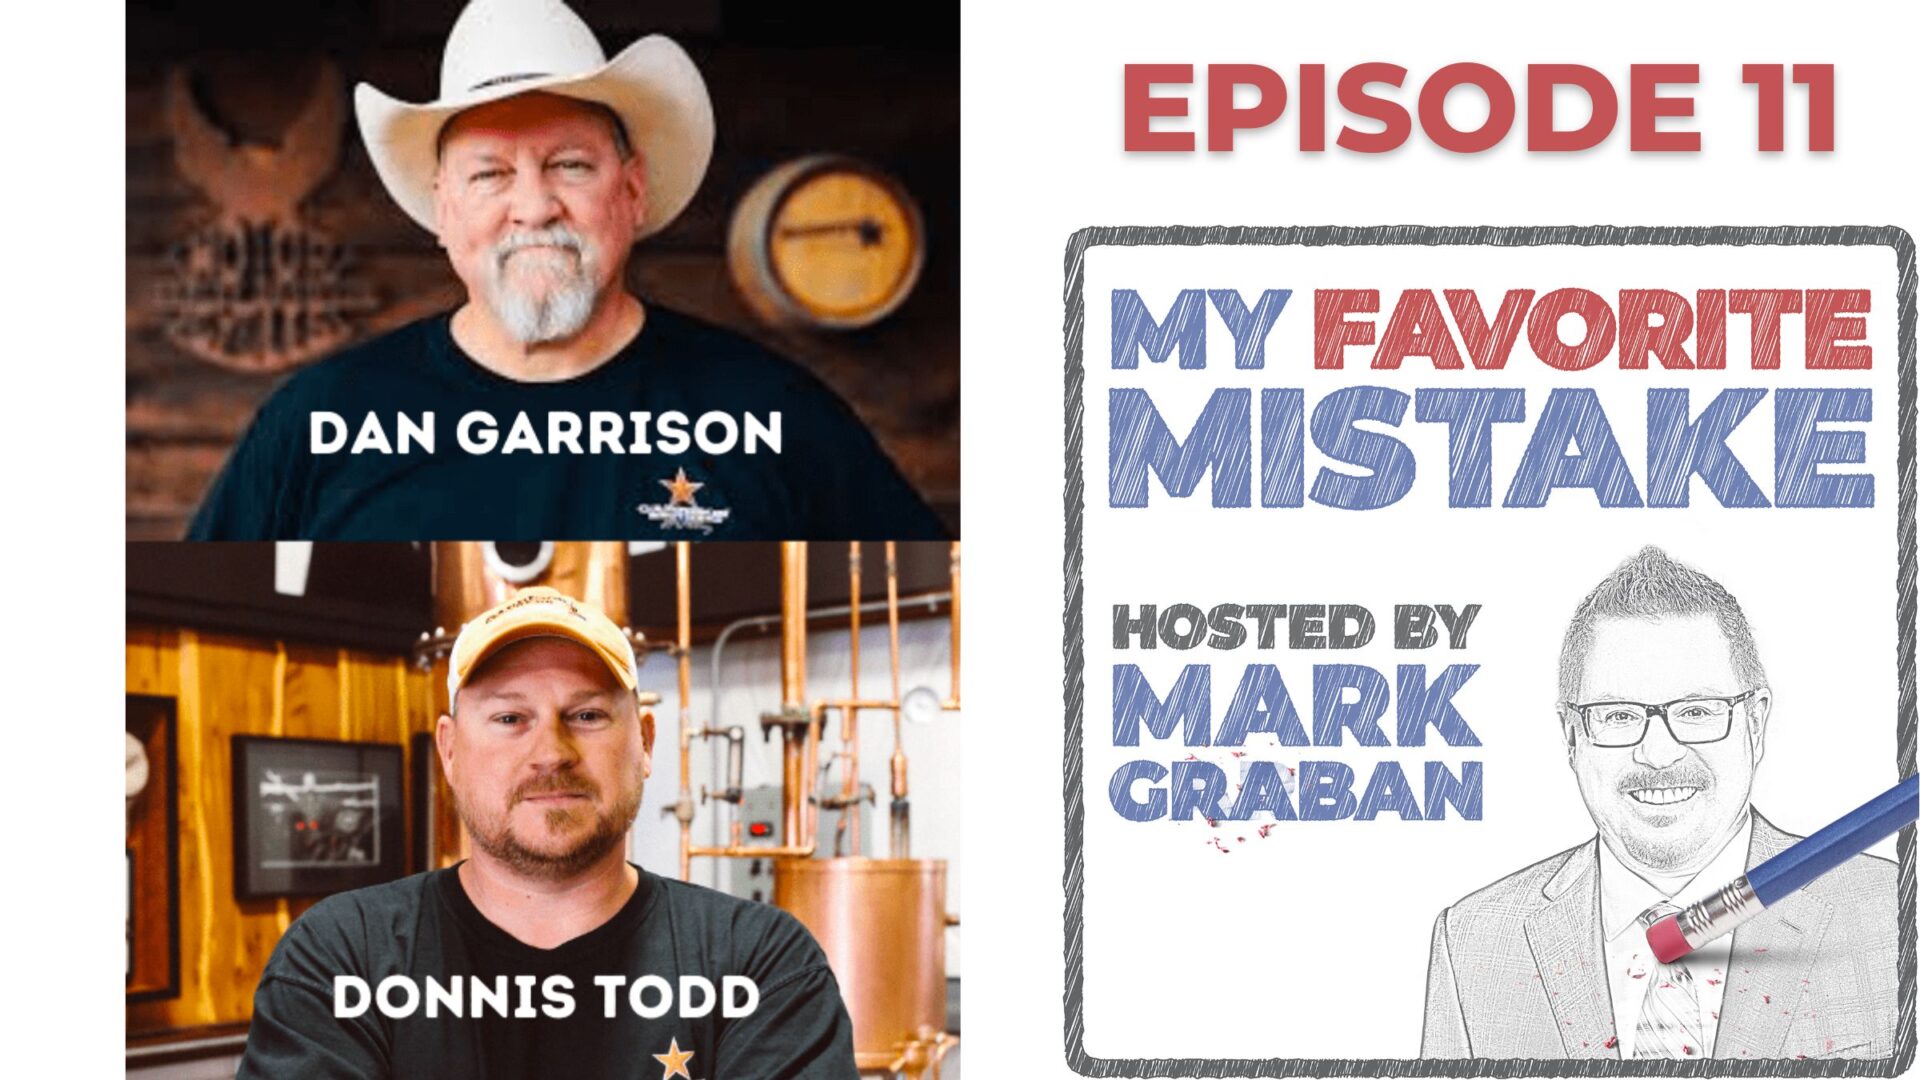 Donnis Todd and Dan Garrison on Their “Favorite Mistakes” in Making and Selling Texas Bourbon Whiskey